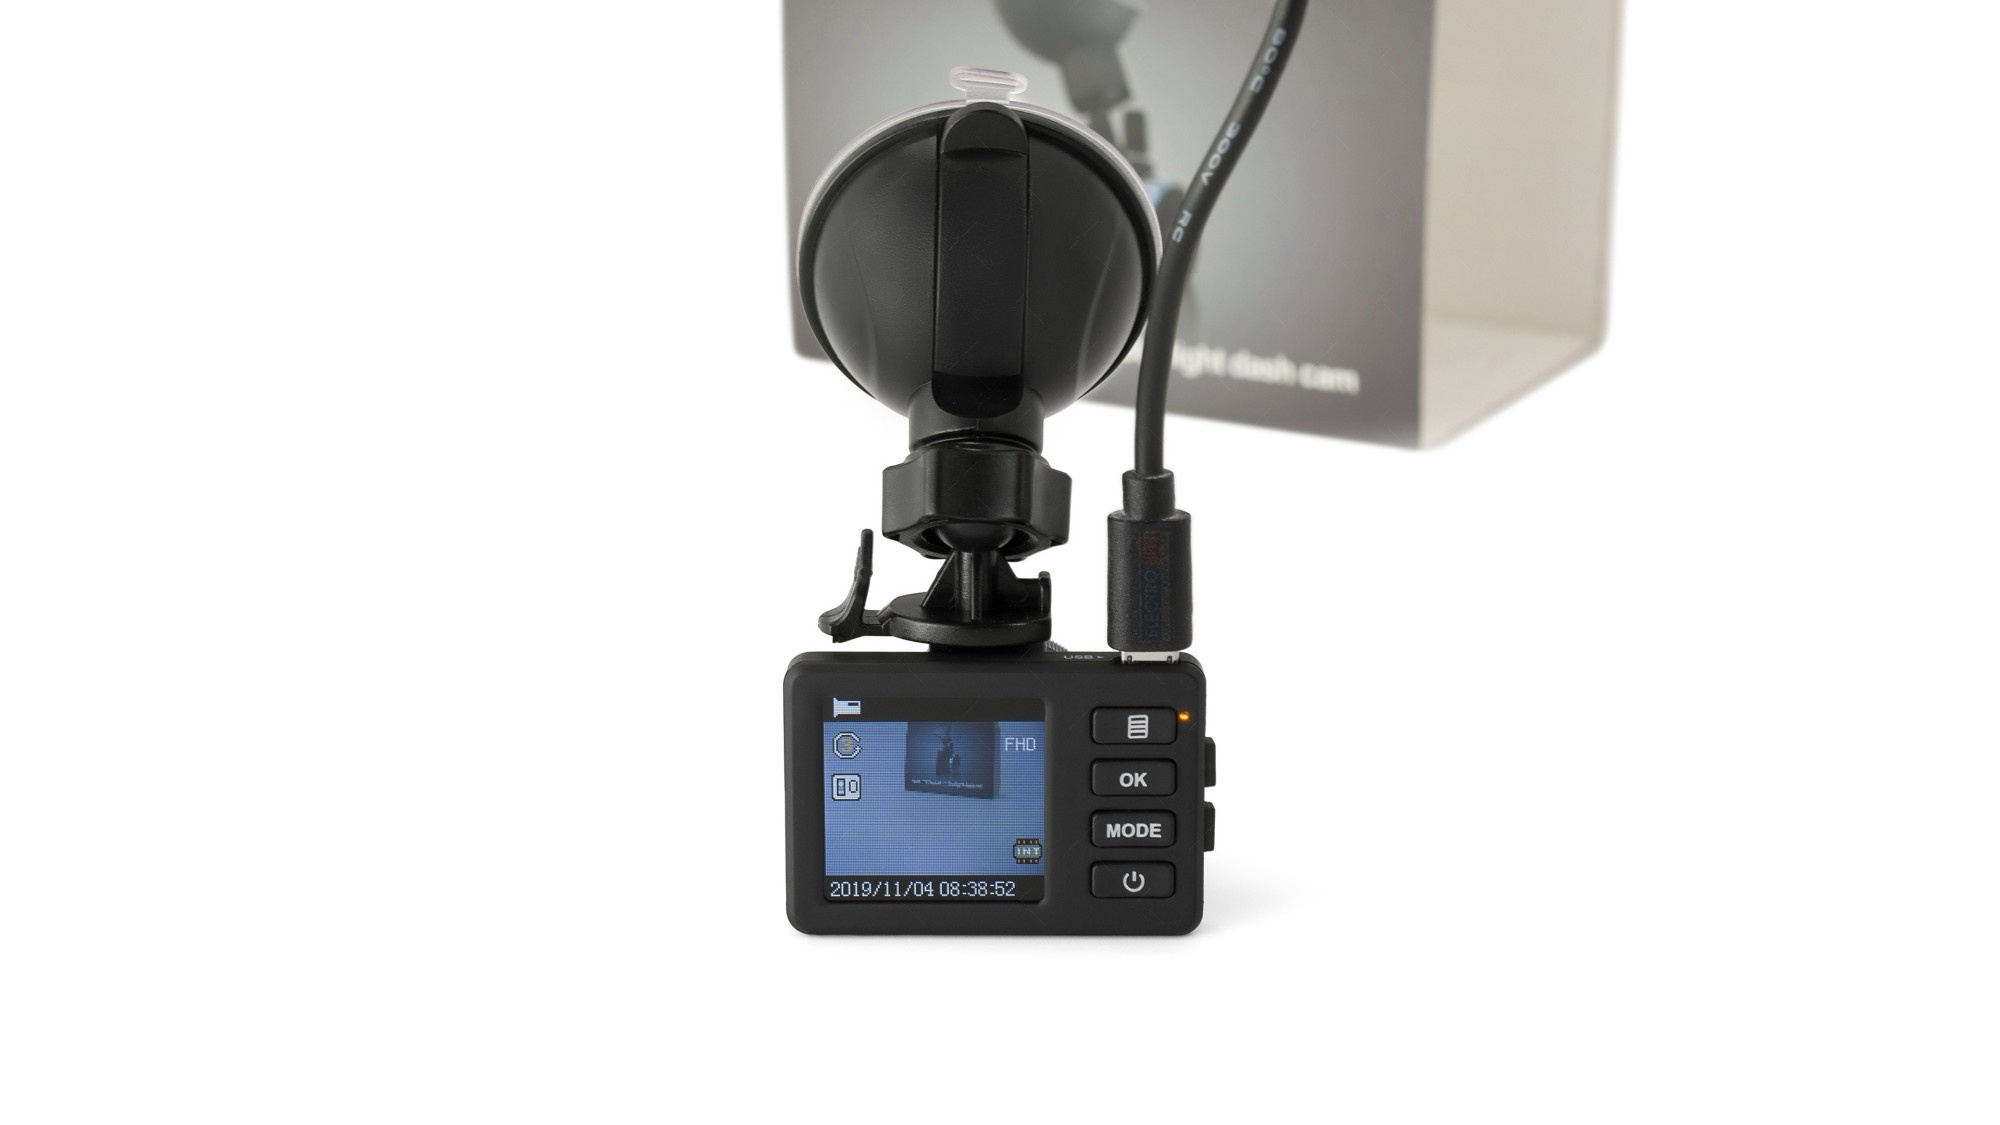 Accurate Recording in High Quality Video - iDrive Car Mount Camera